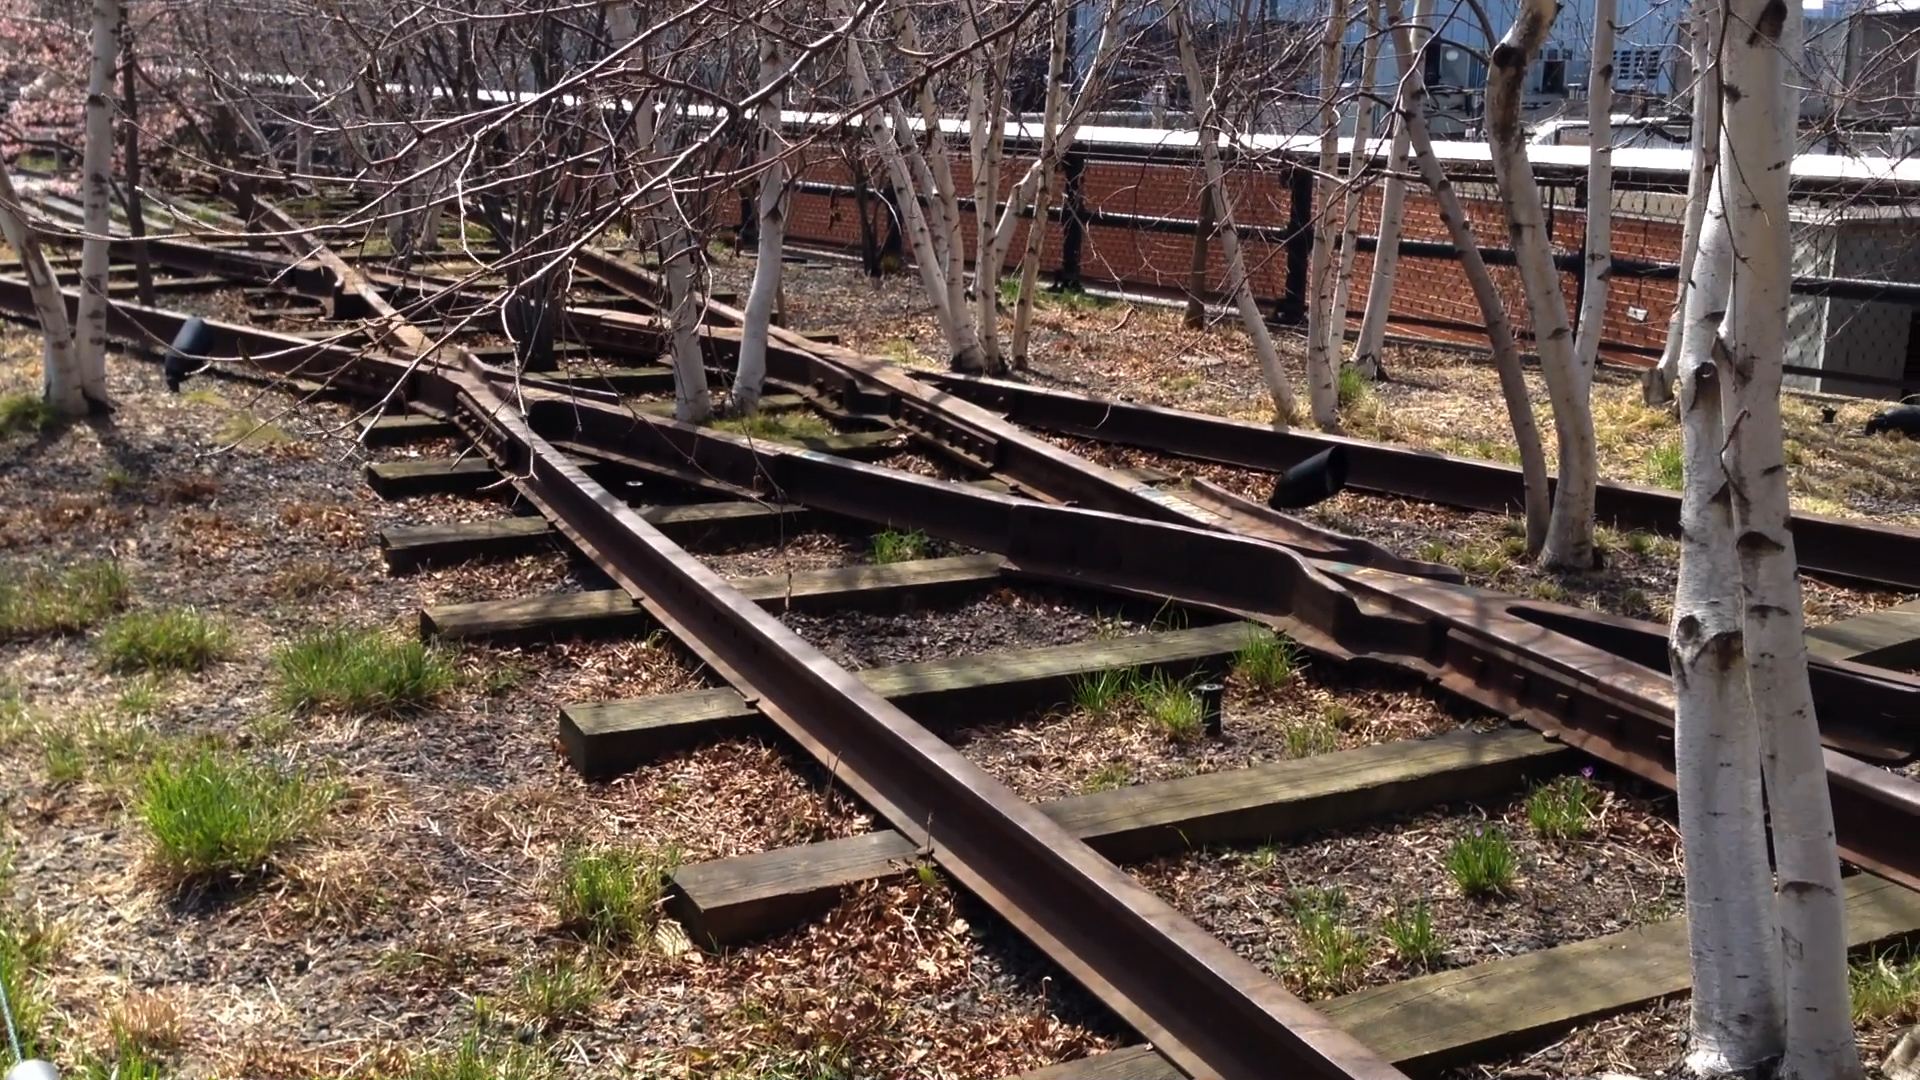 On the Road with Libby O'Connell: The High Line, New York City